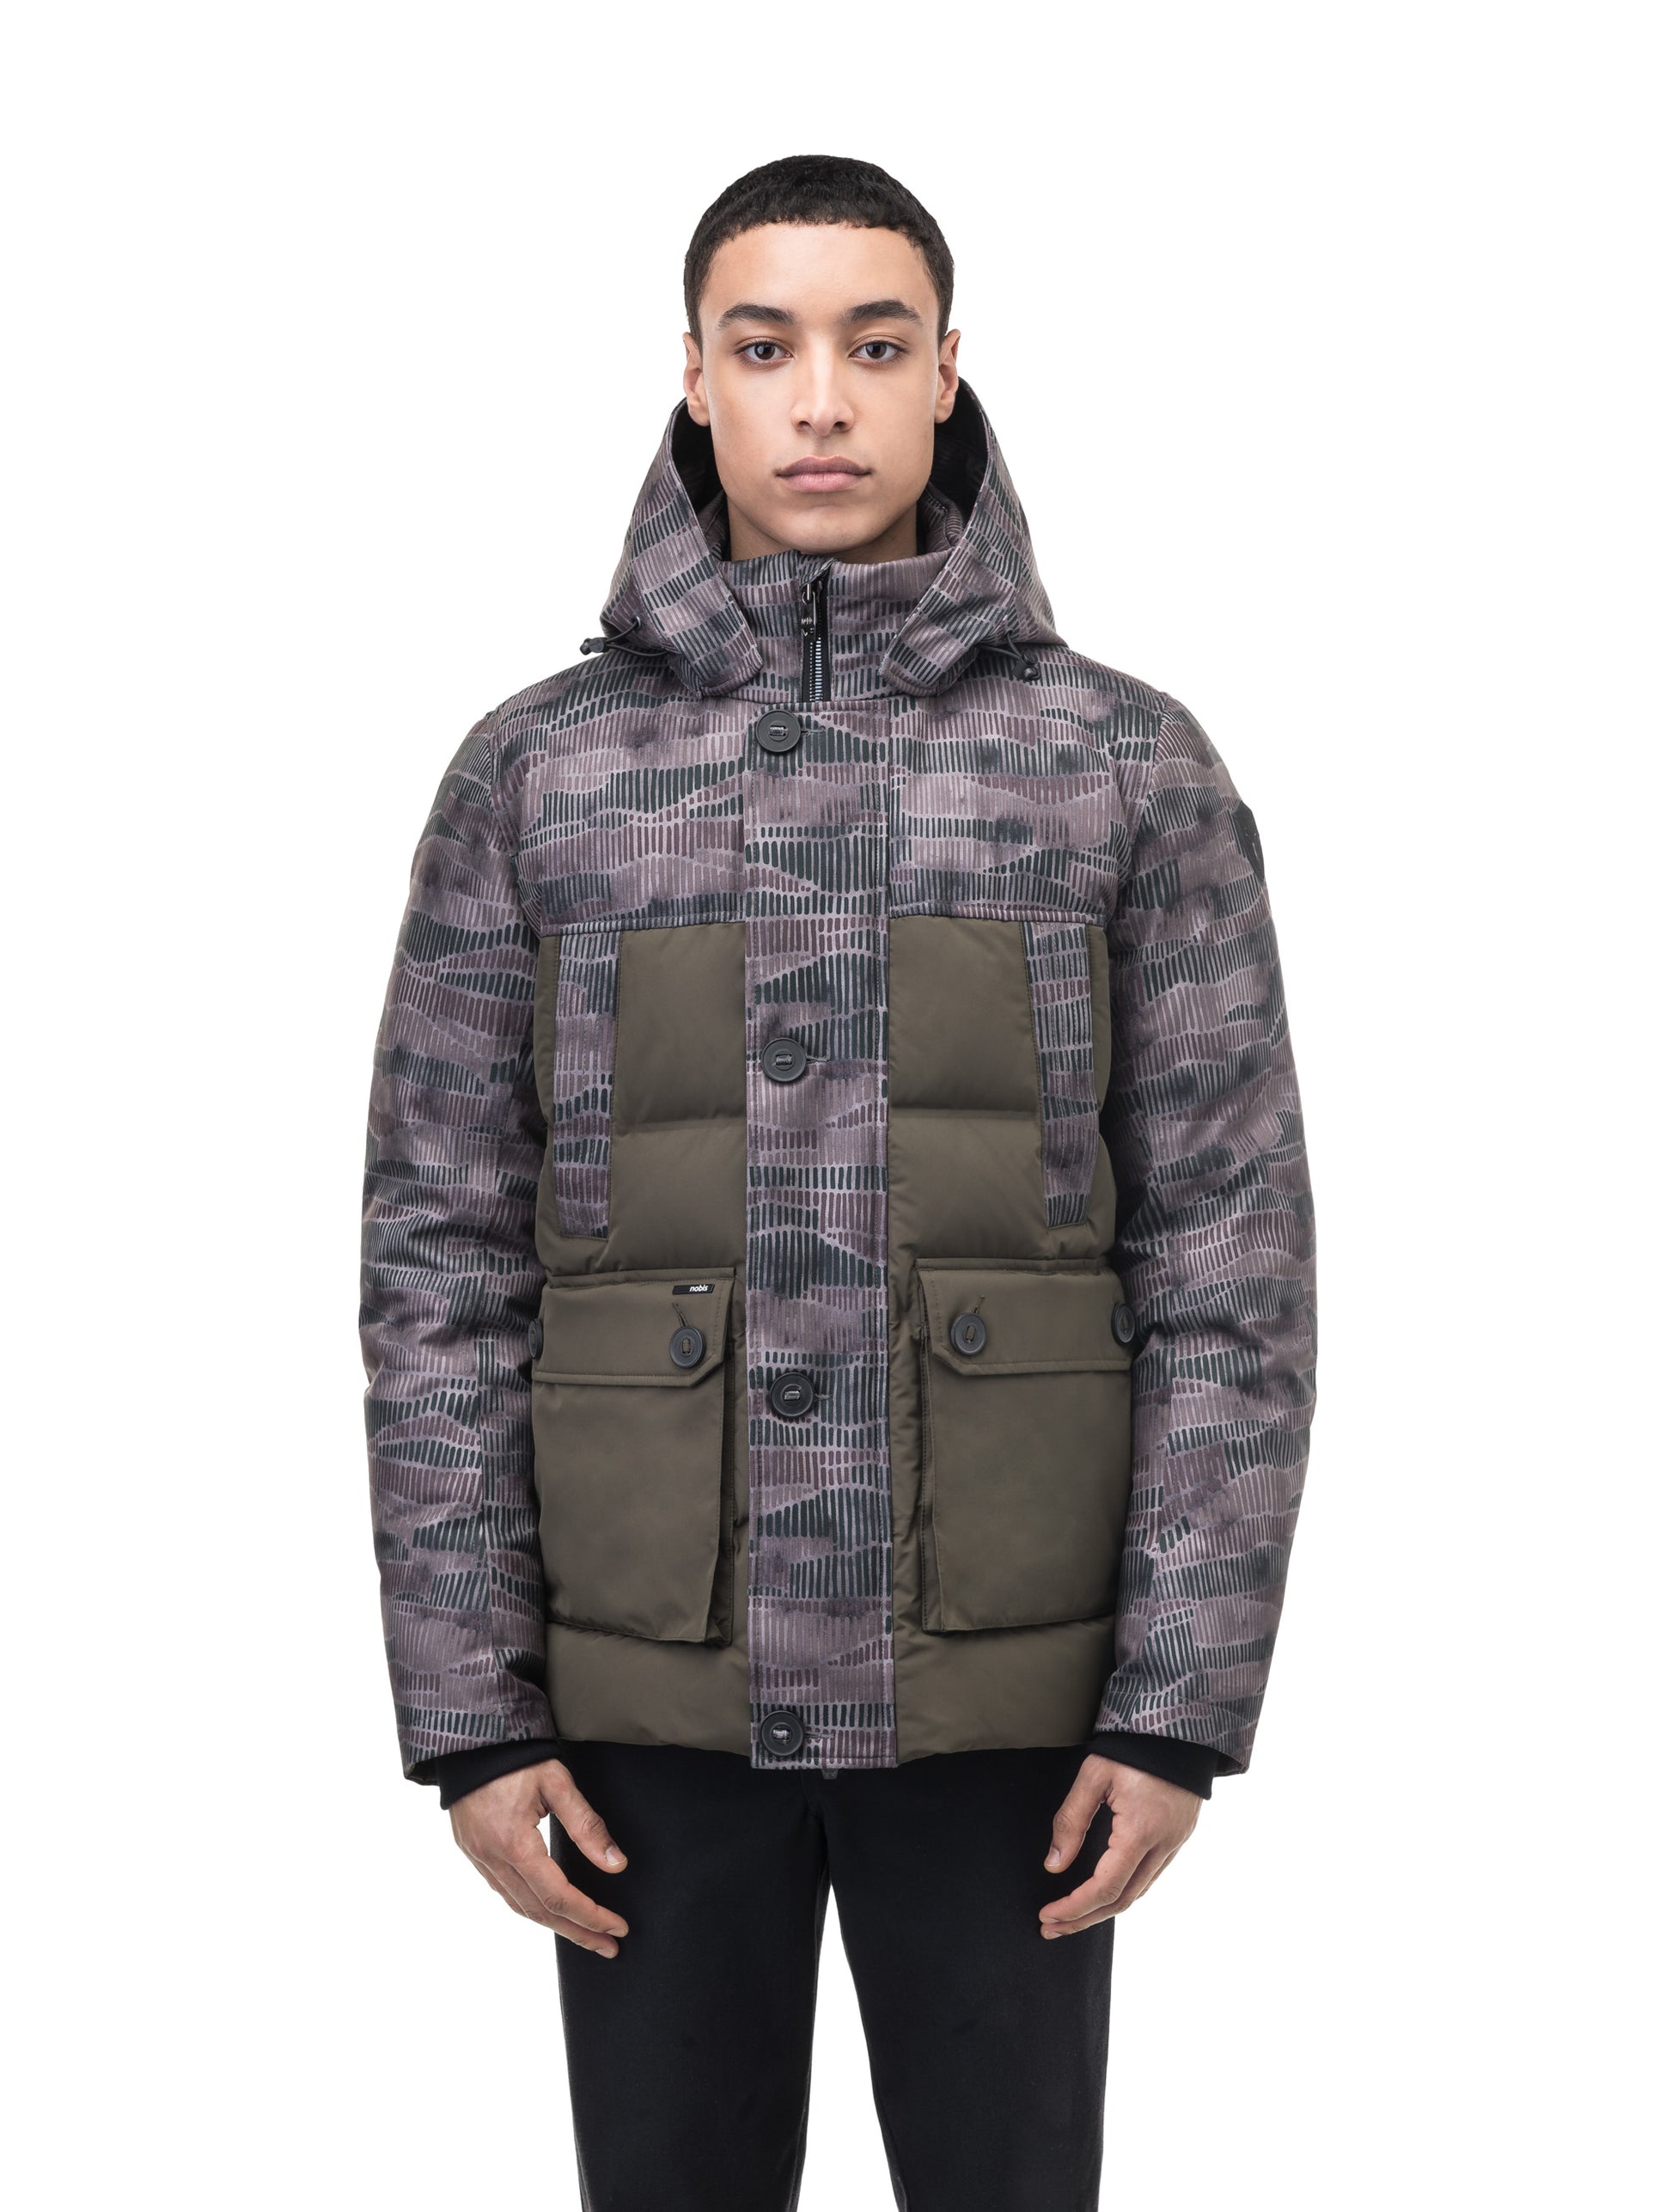 Cardinal Men's Puffer Parka in hip length, Canadian duck down insulation, removable hood, quilted body, and two-way front zipper, in Dark Sandstorm